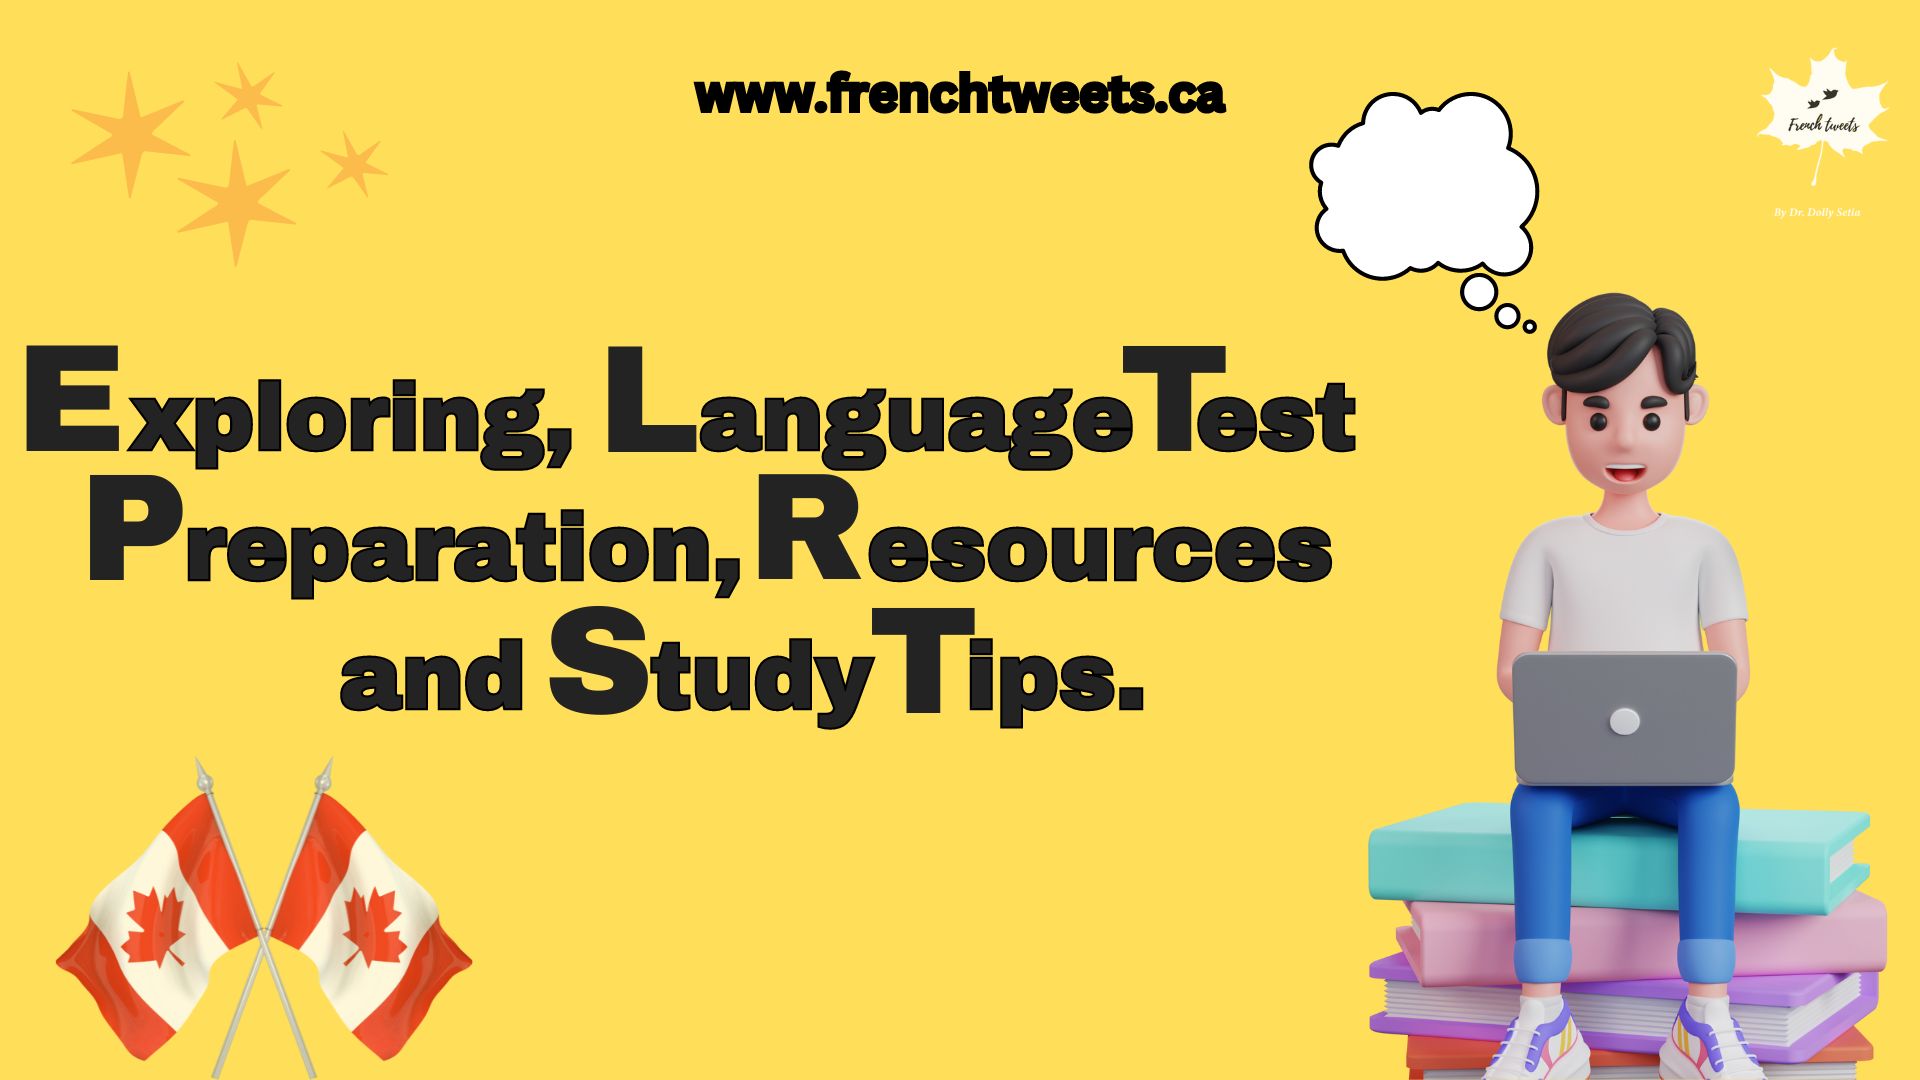 Exploring Language Test Preparation Resources and Study Tips.